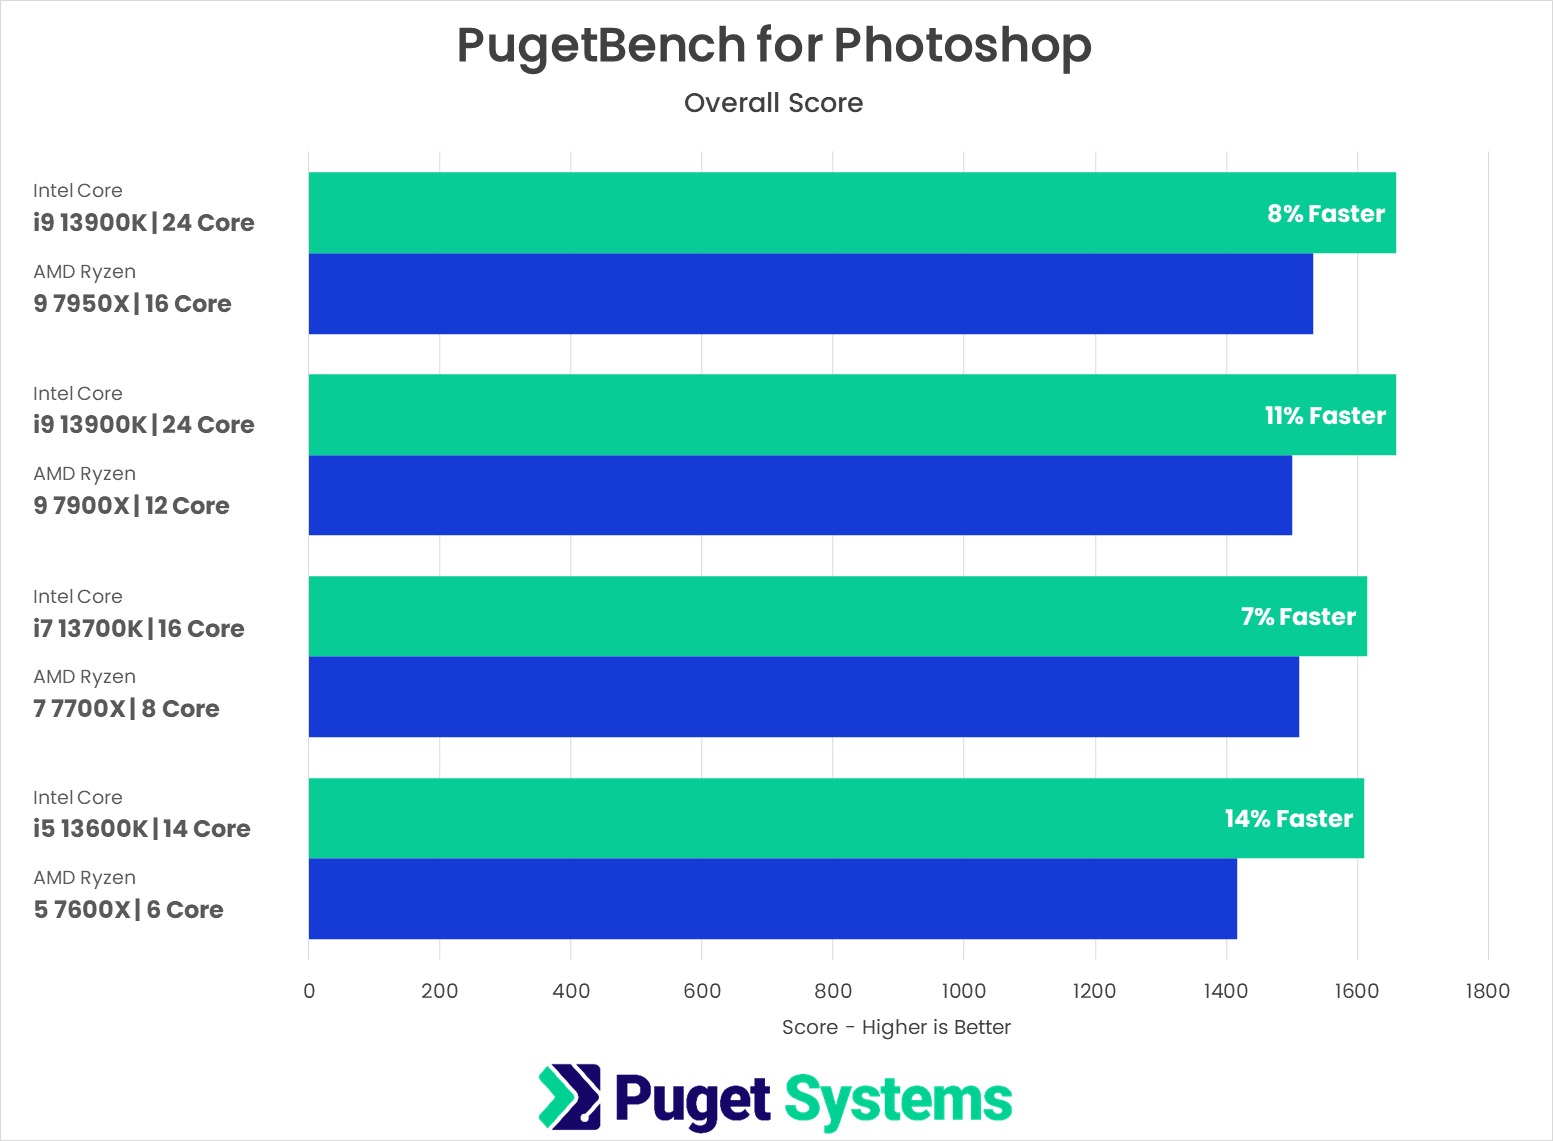 PugetBench for Photoshop AMD Ryzen 7000 vs Intel Core 13th Gen Benchmark Testing Results